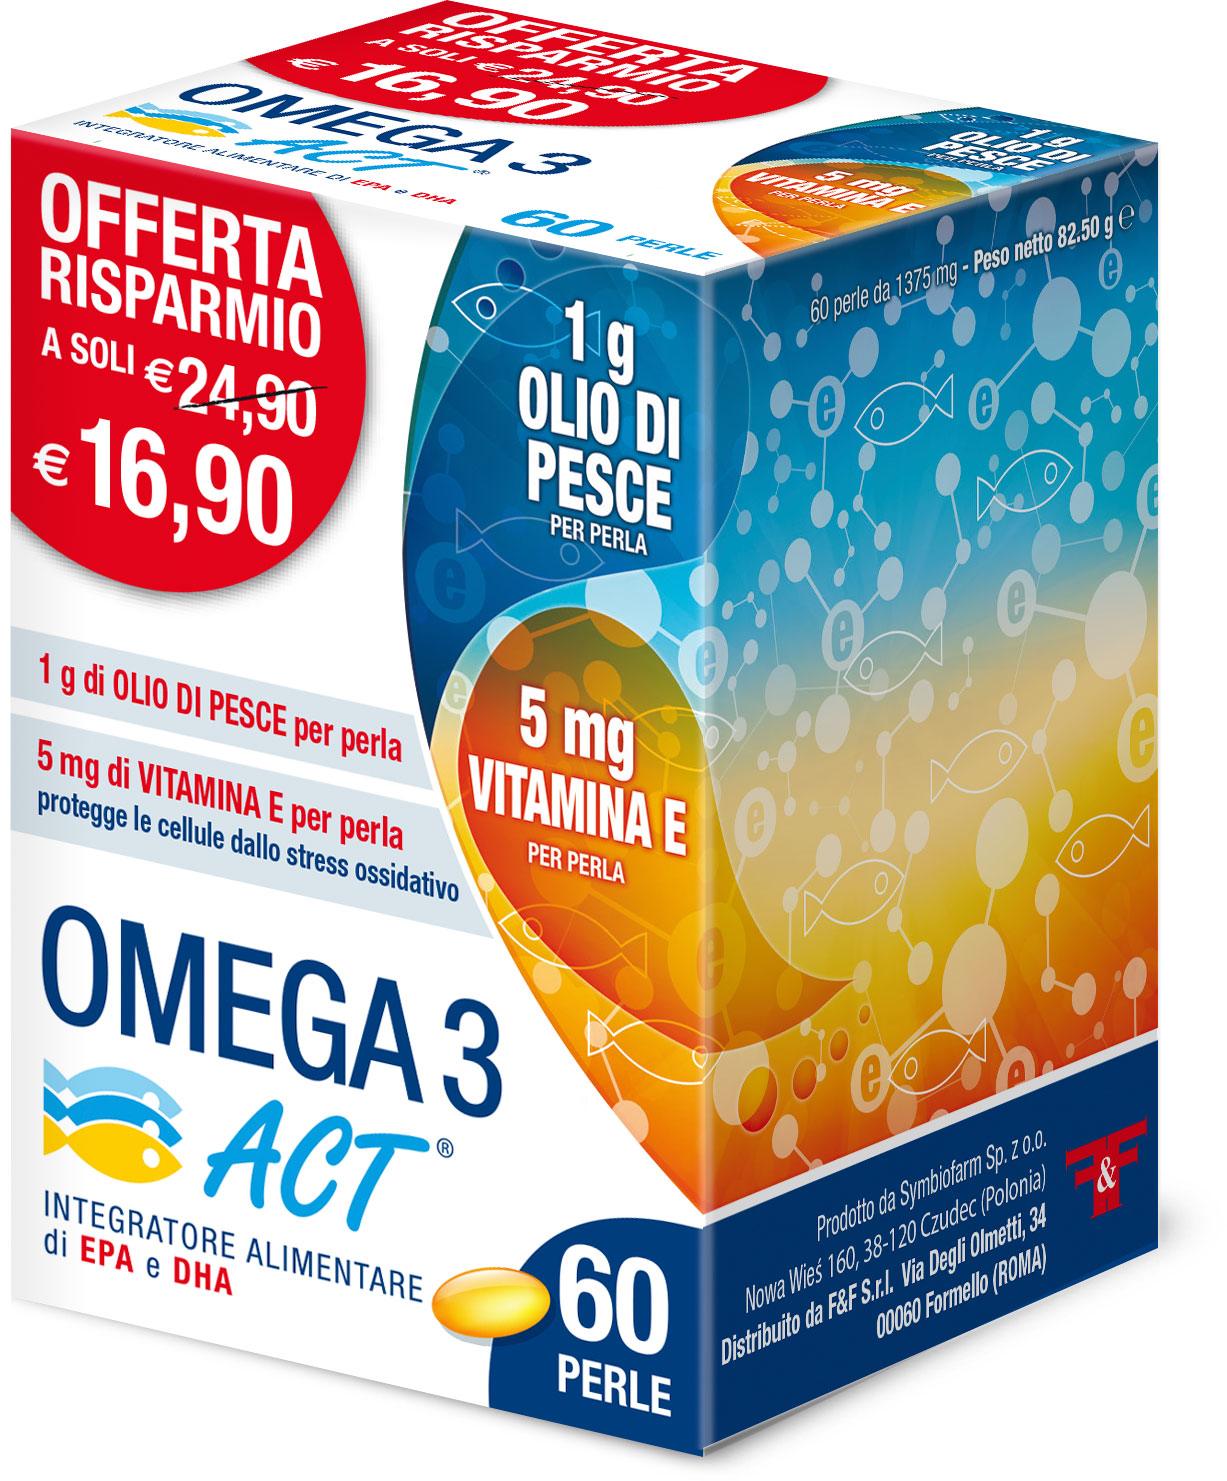 Image of Omega 3 Act 1g Integratore Alimentare 60 Perle